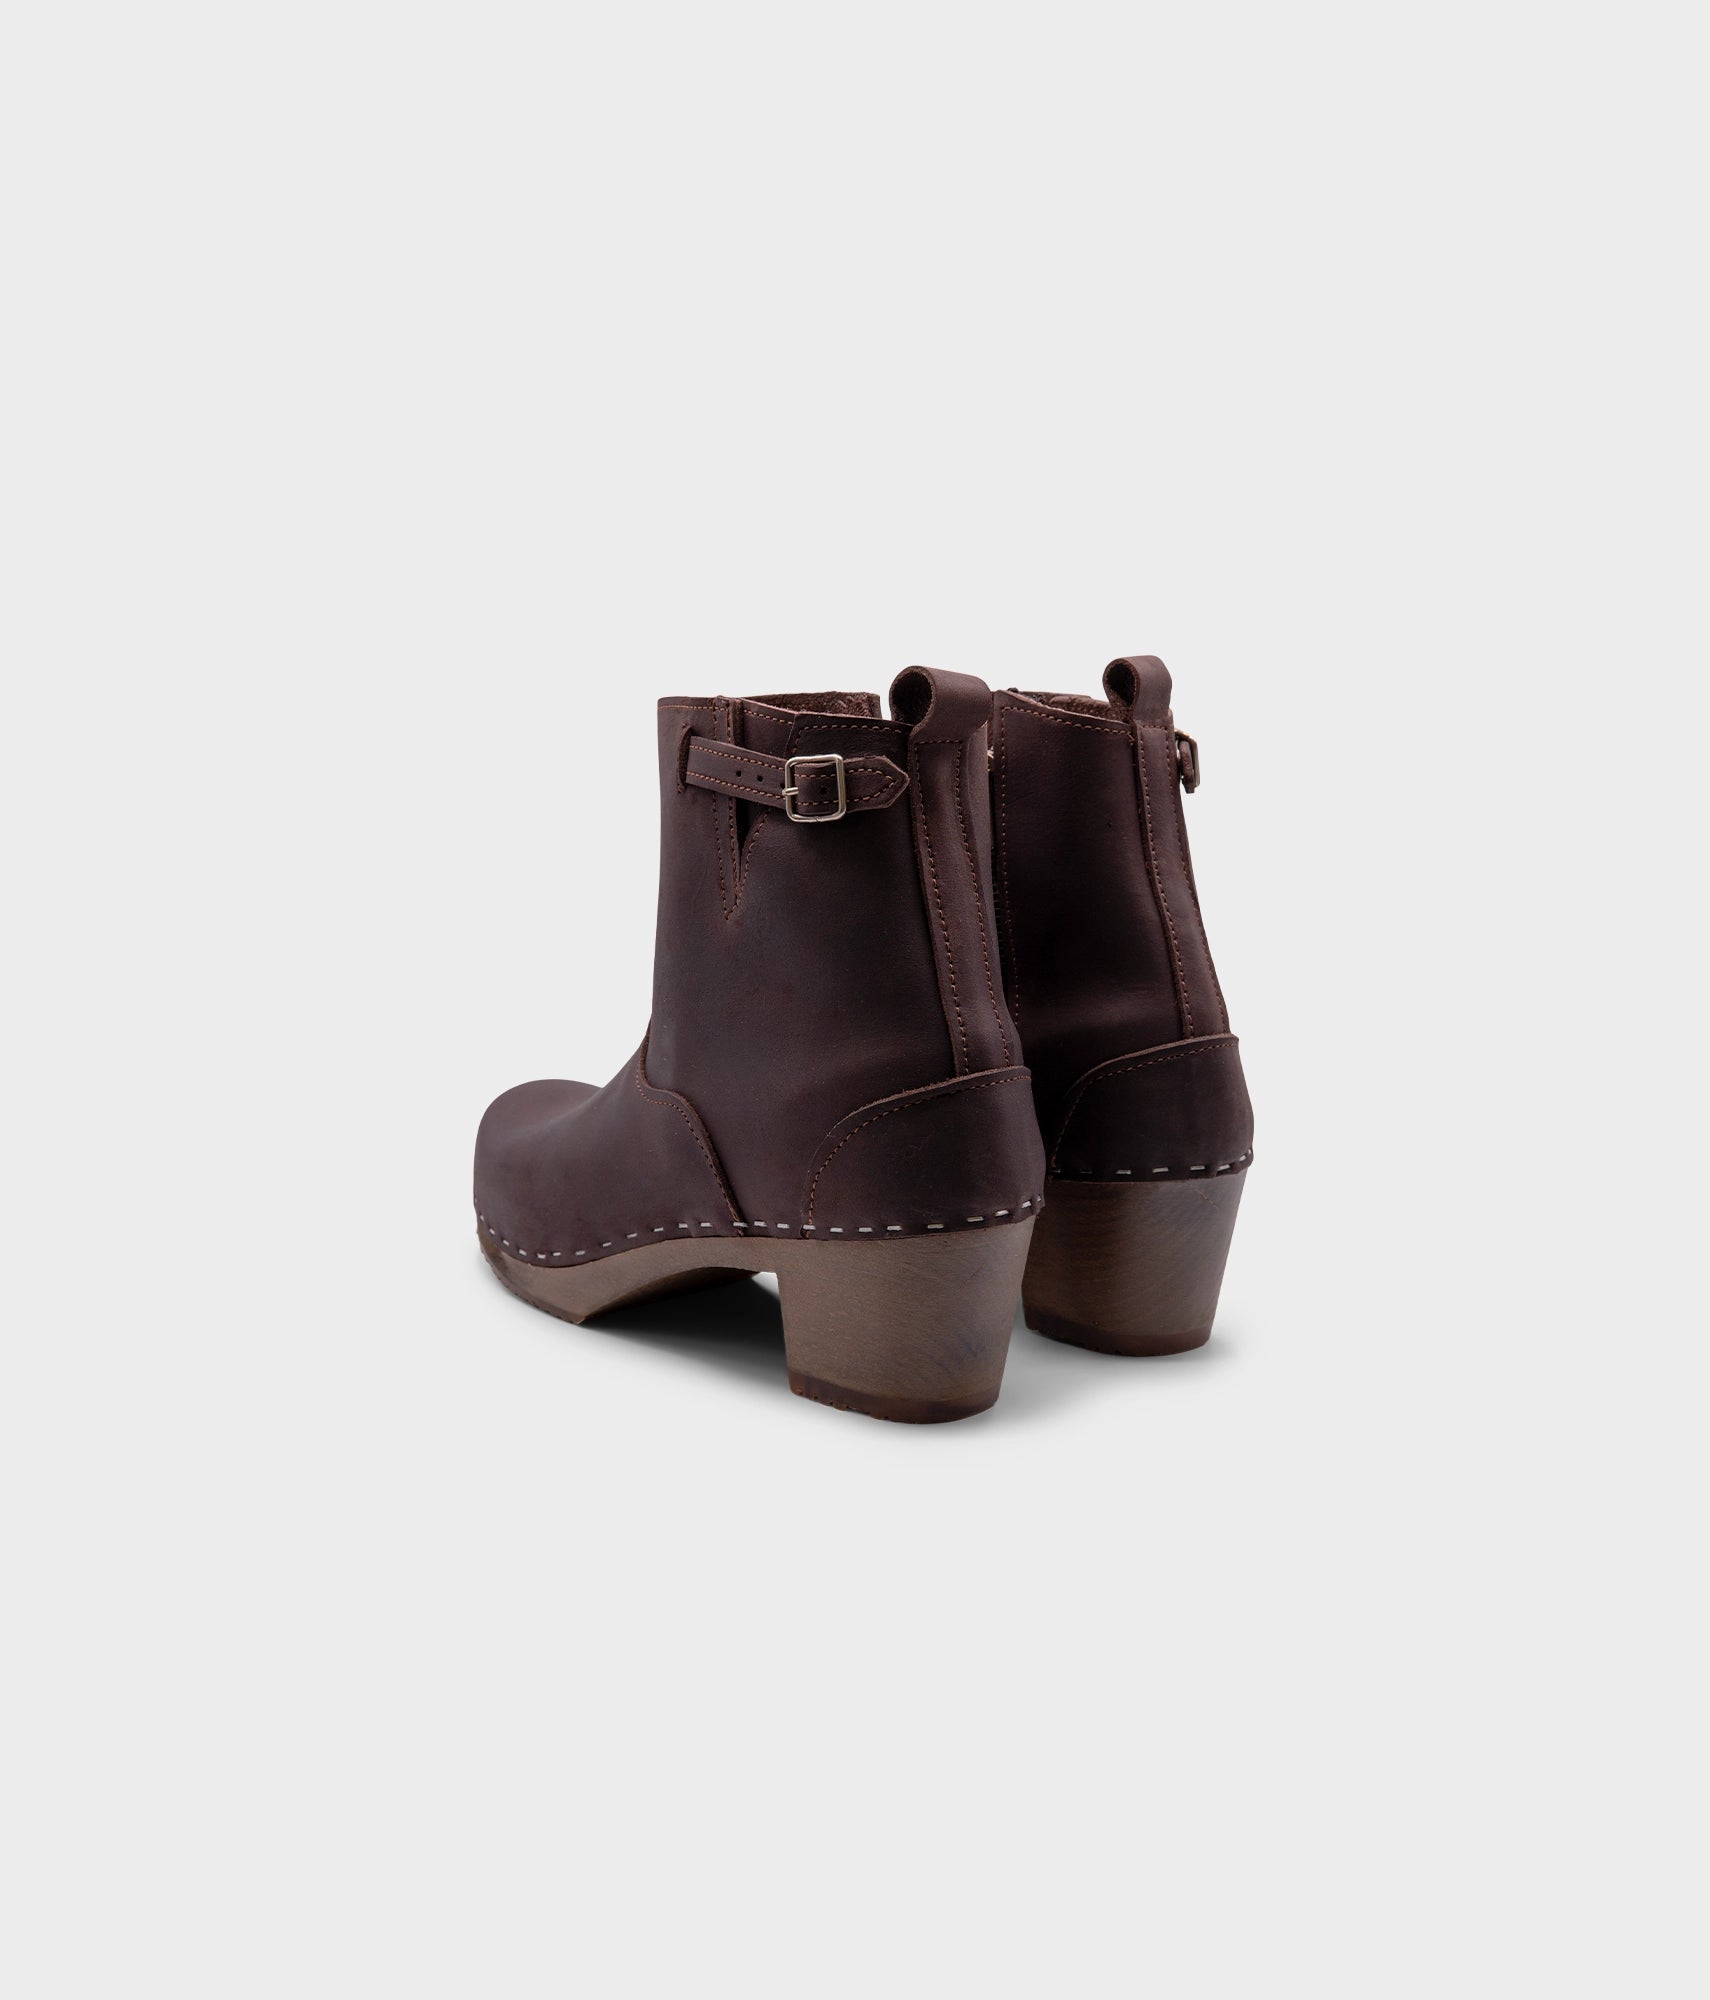 high-heeled clog boots in dark brown nubuck leather stapled on a dark wooden base with a silver buckle